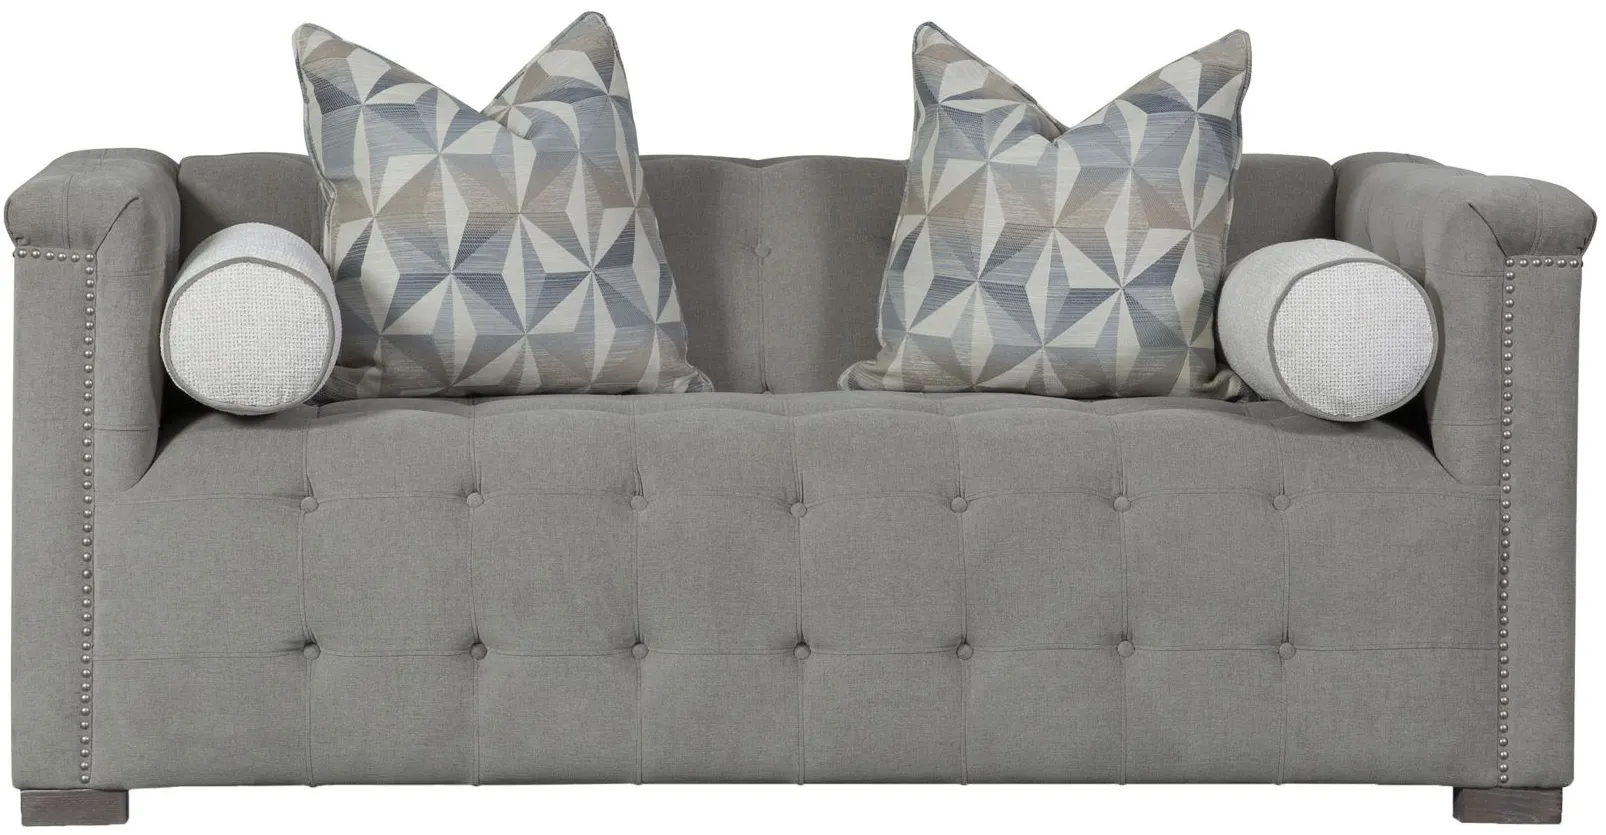 Diana Loveseat in Smoke by Aria Designs